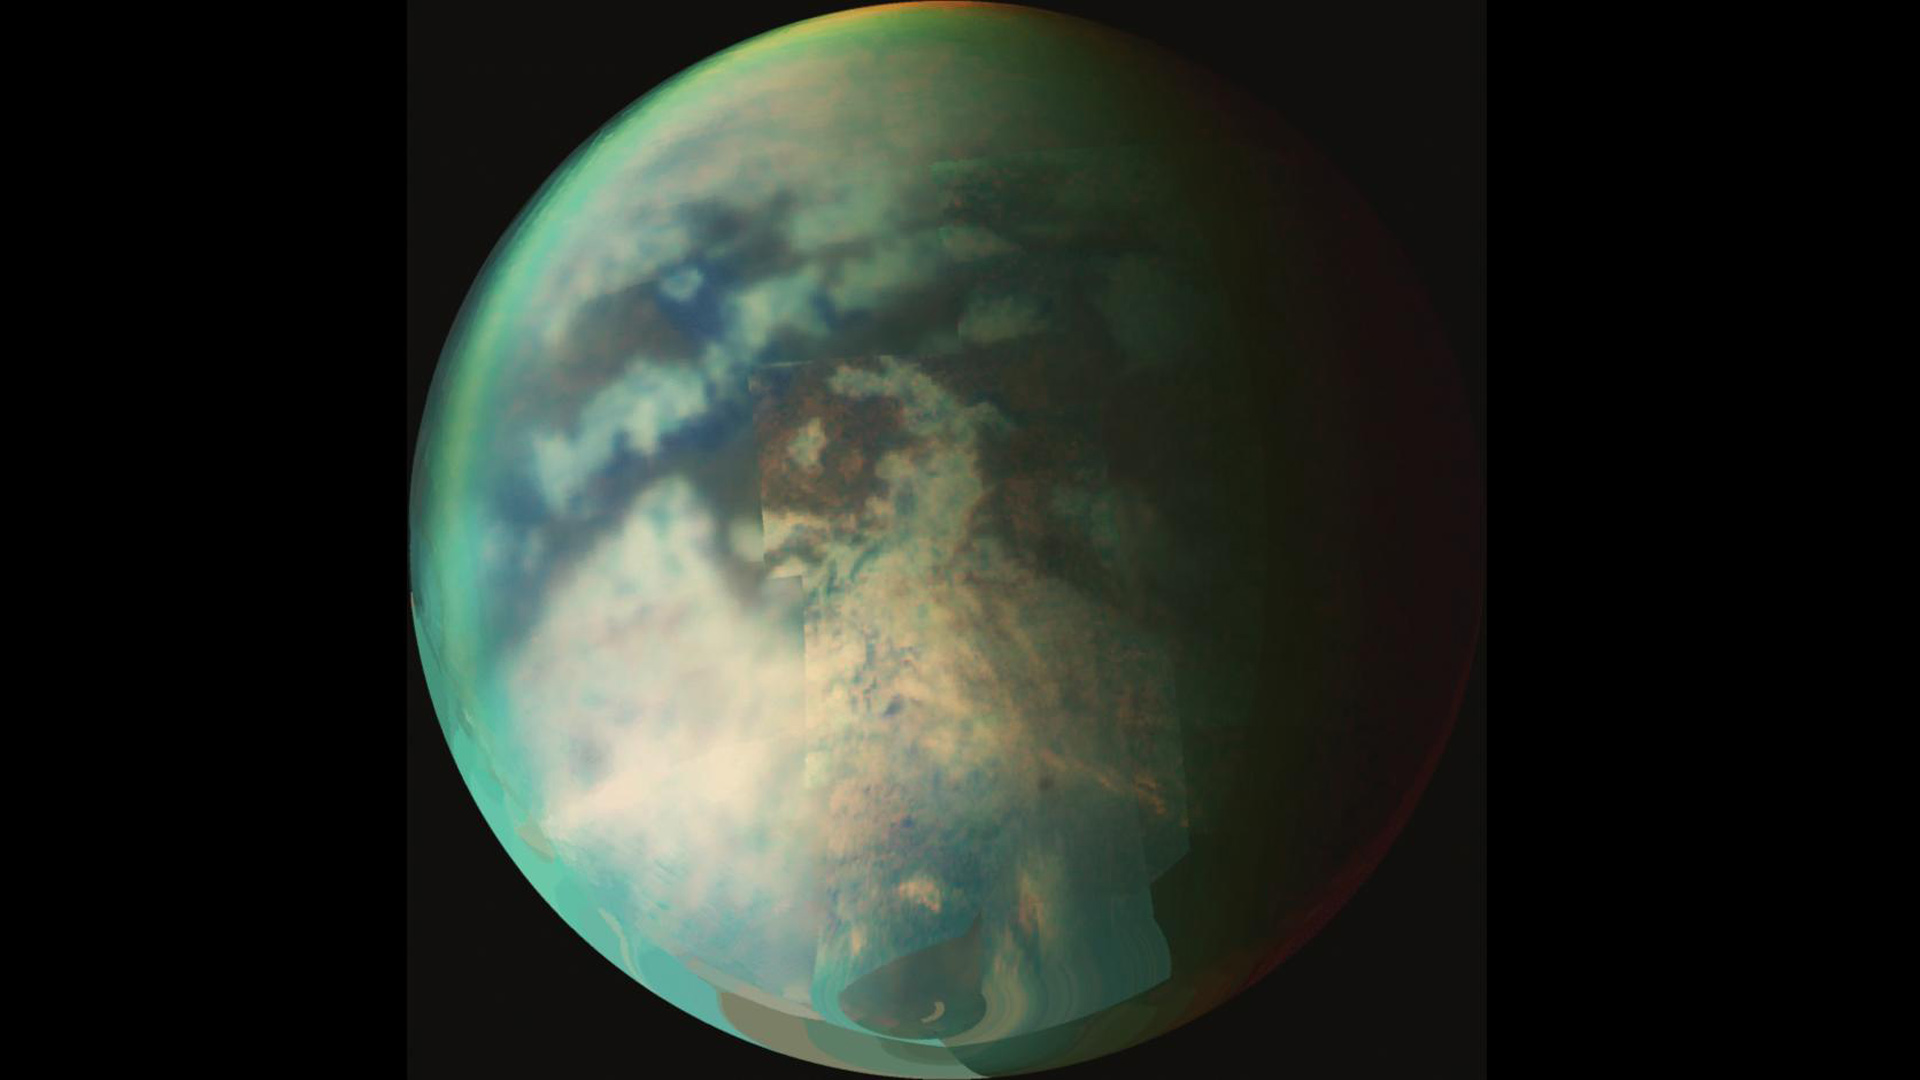 Saturn's moon Titan looks a bit like Earth, but is actually quite different.